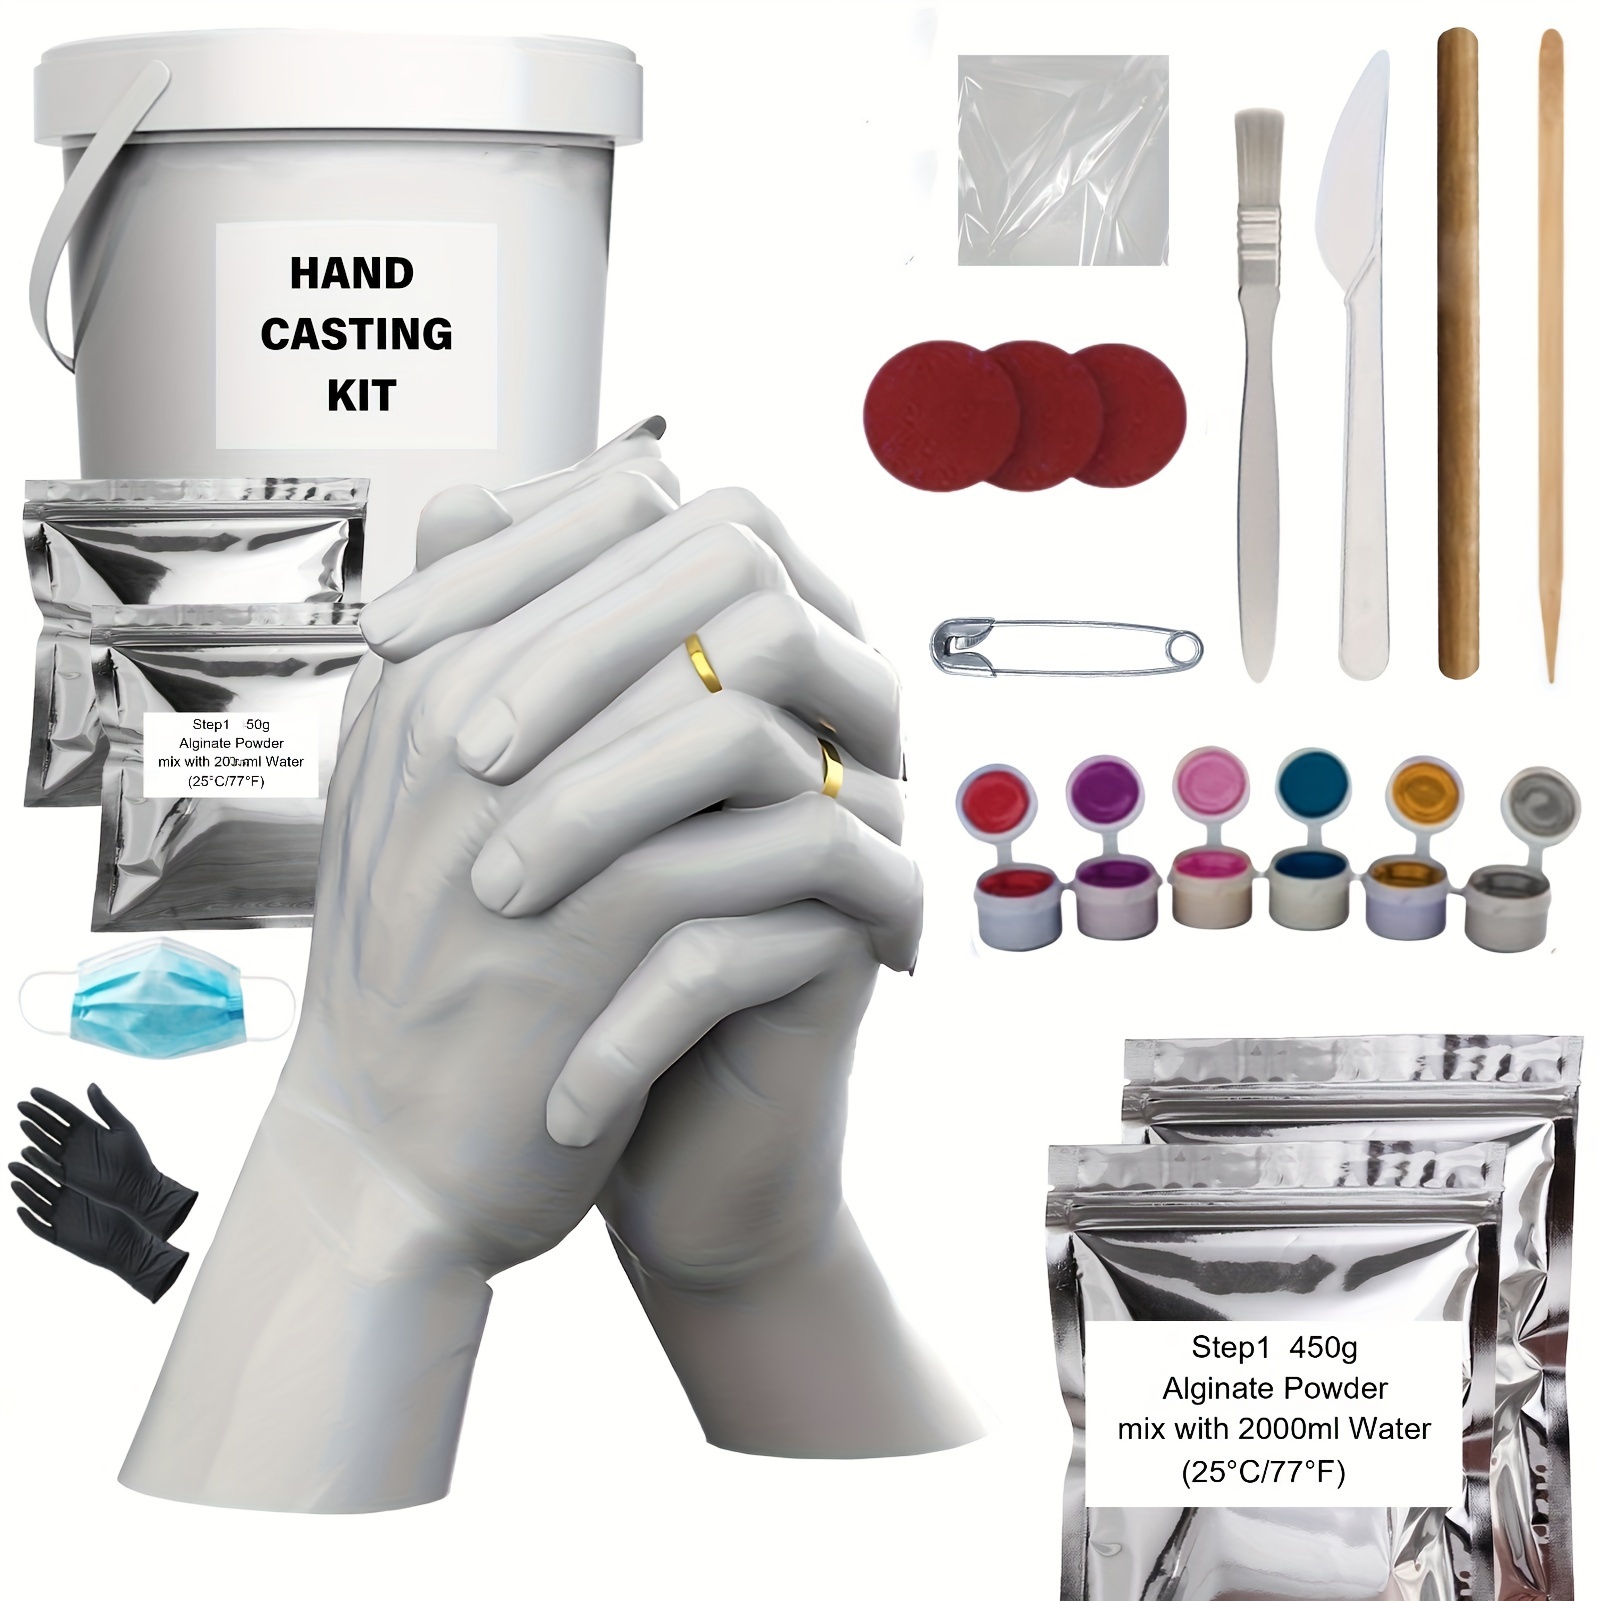 Family Hand Casting Kit Alginate - The Compleat Sculptor